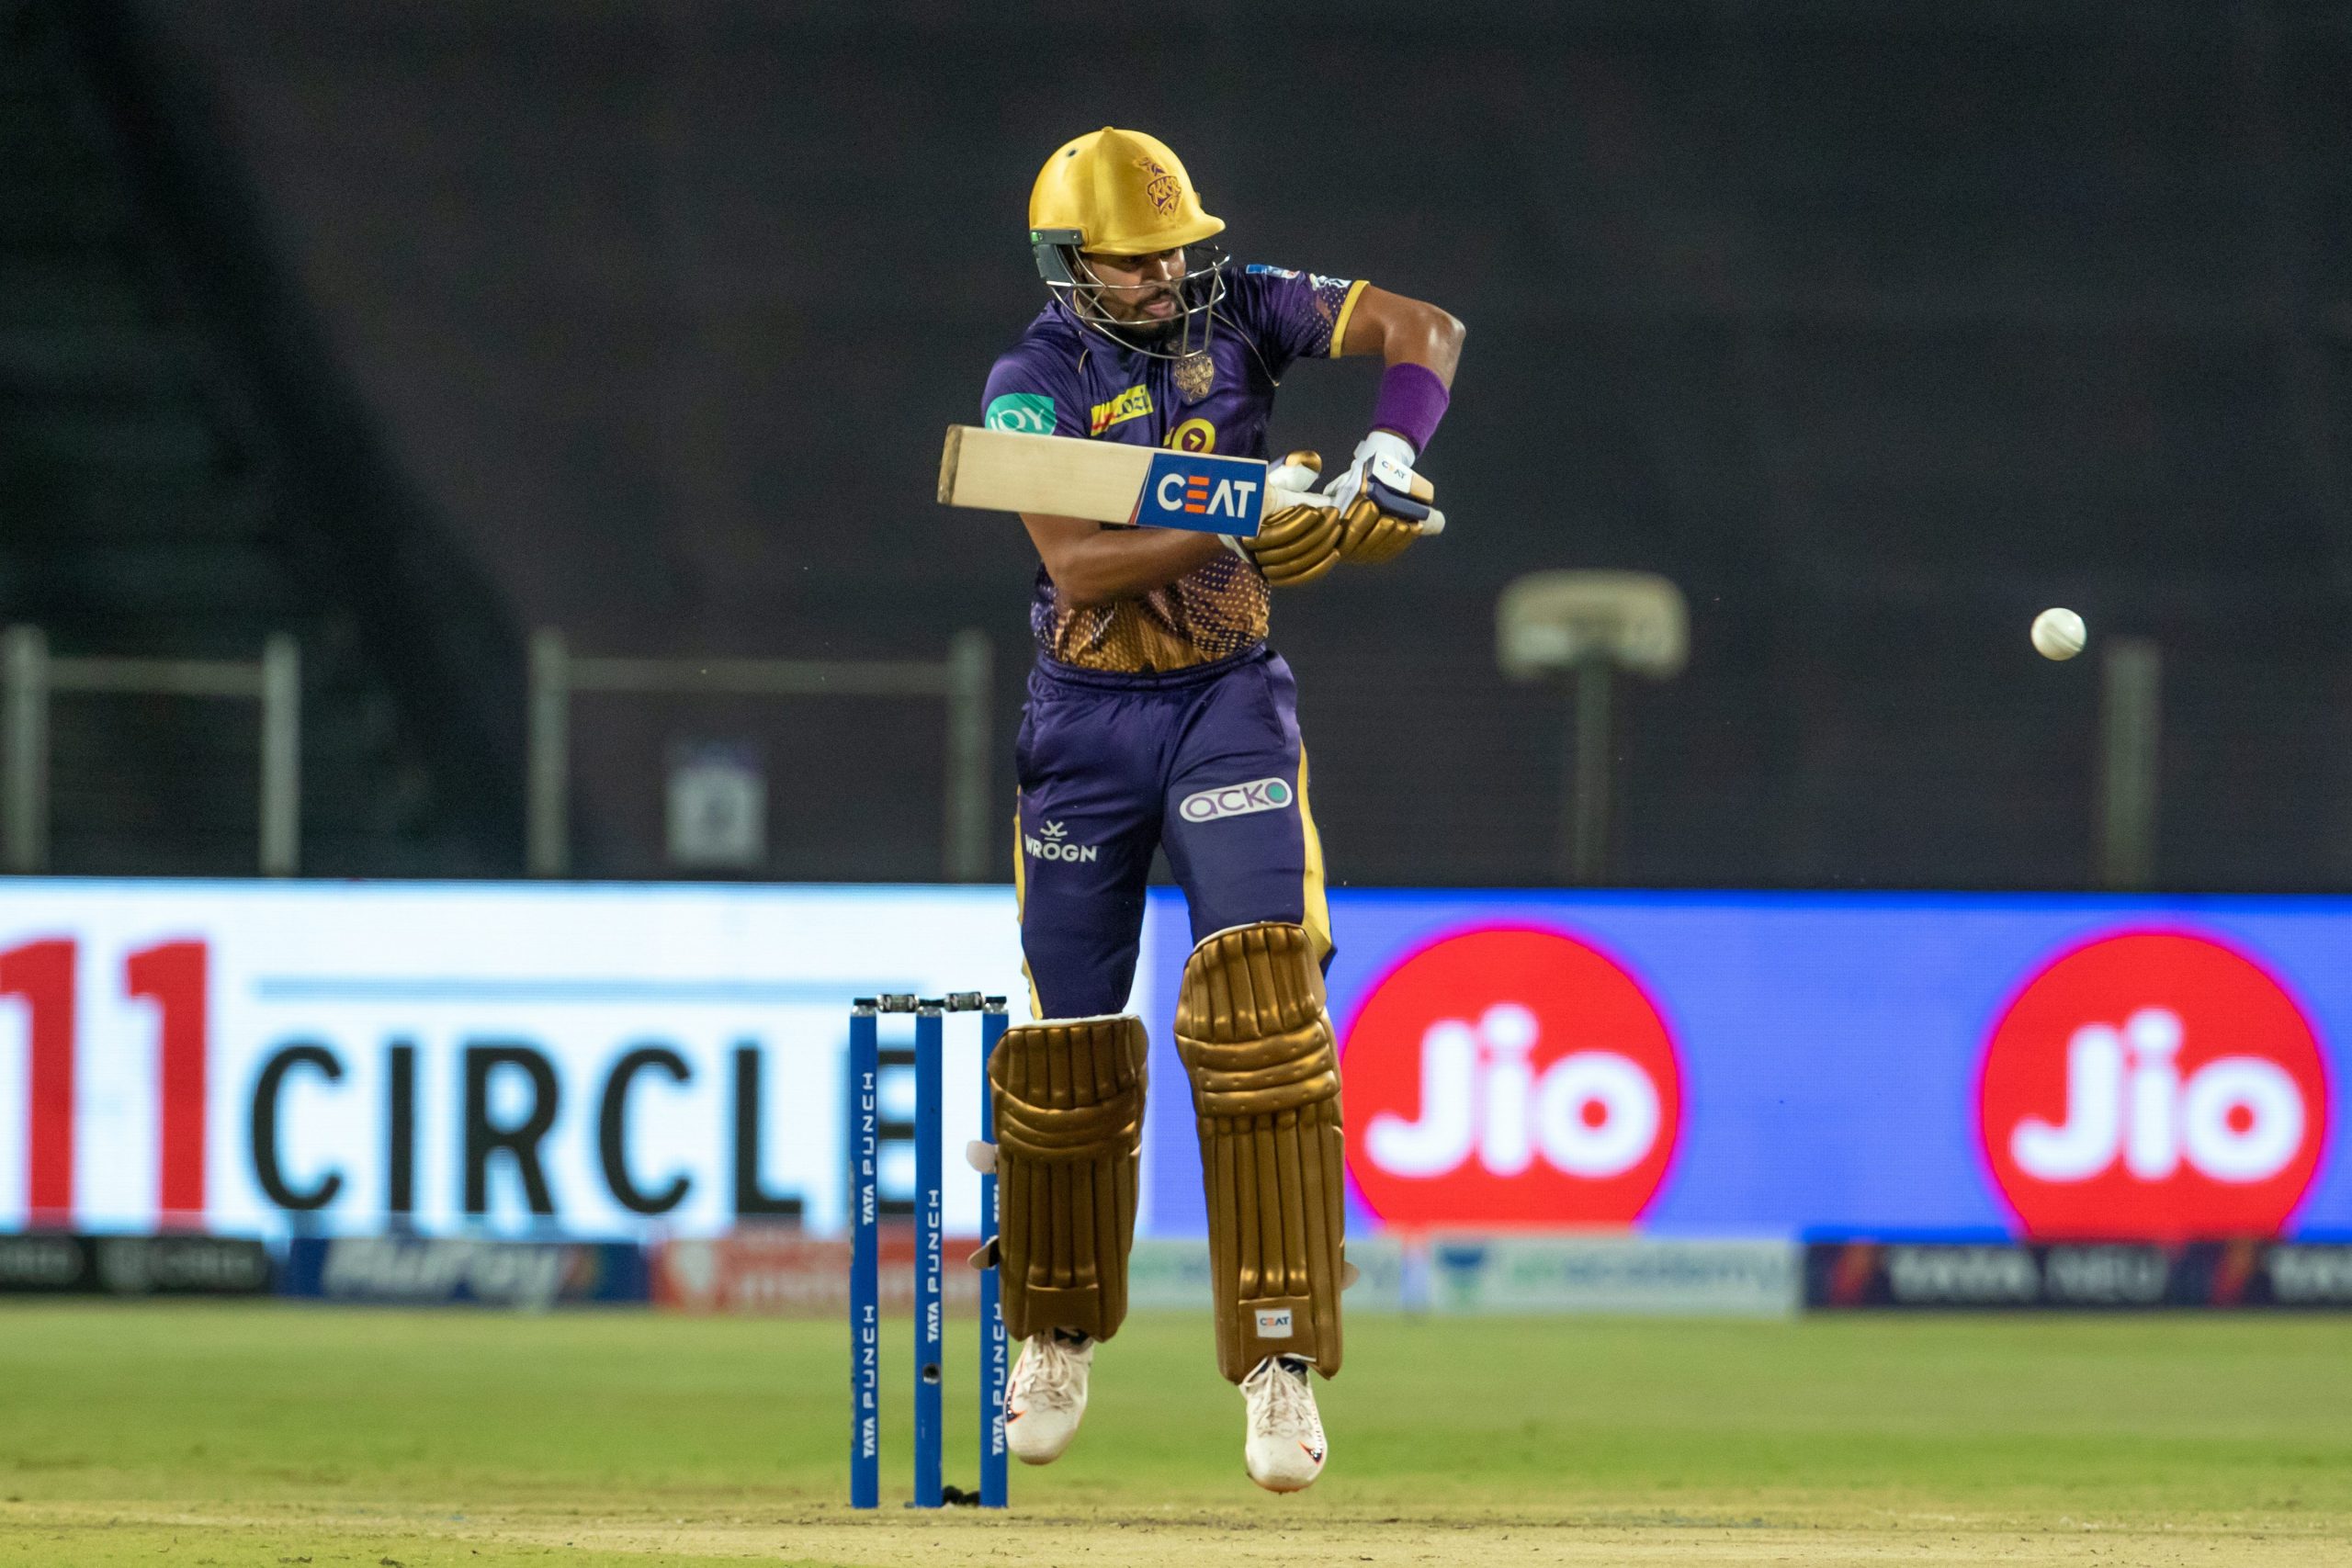 When and where to watch MI vs KKR live streaming and telecast?